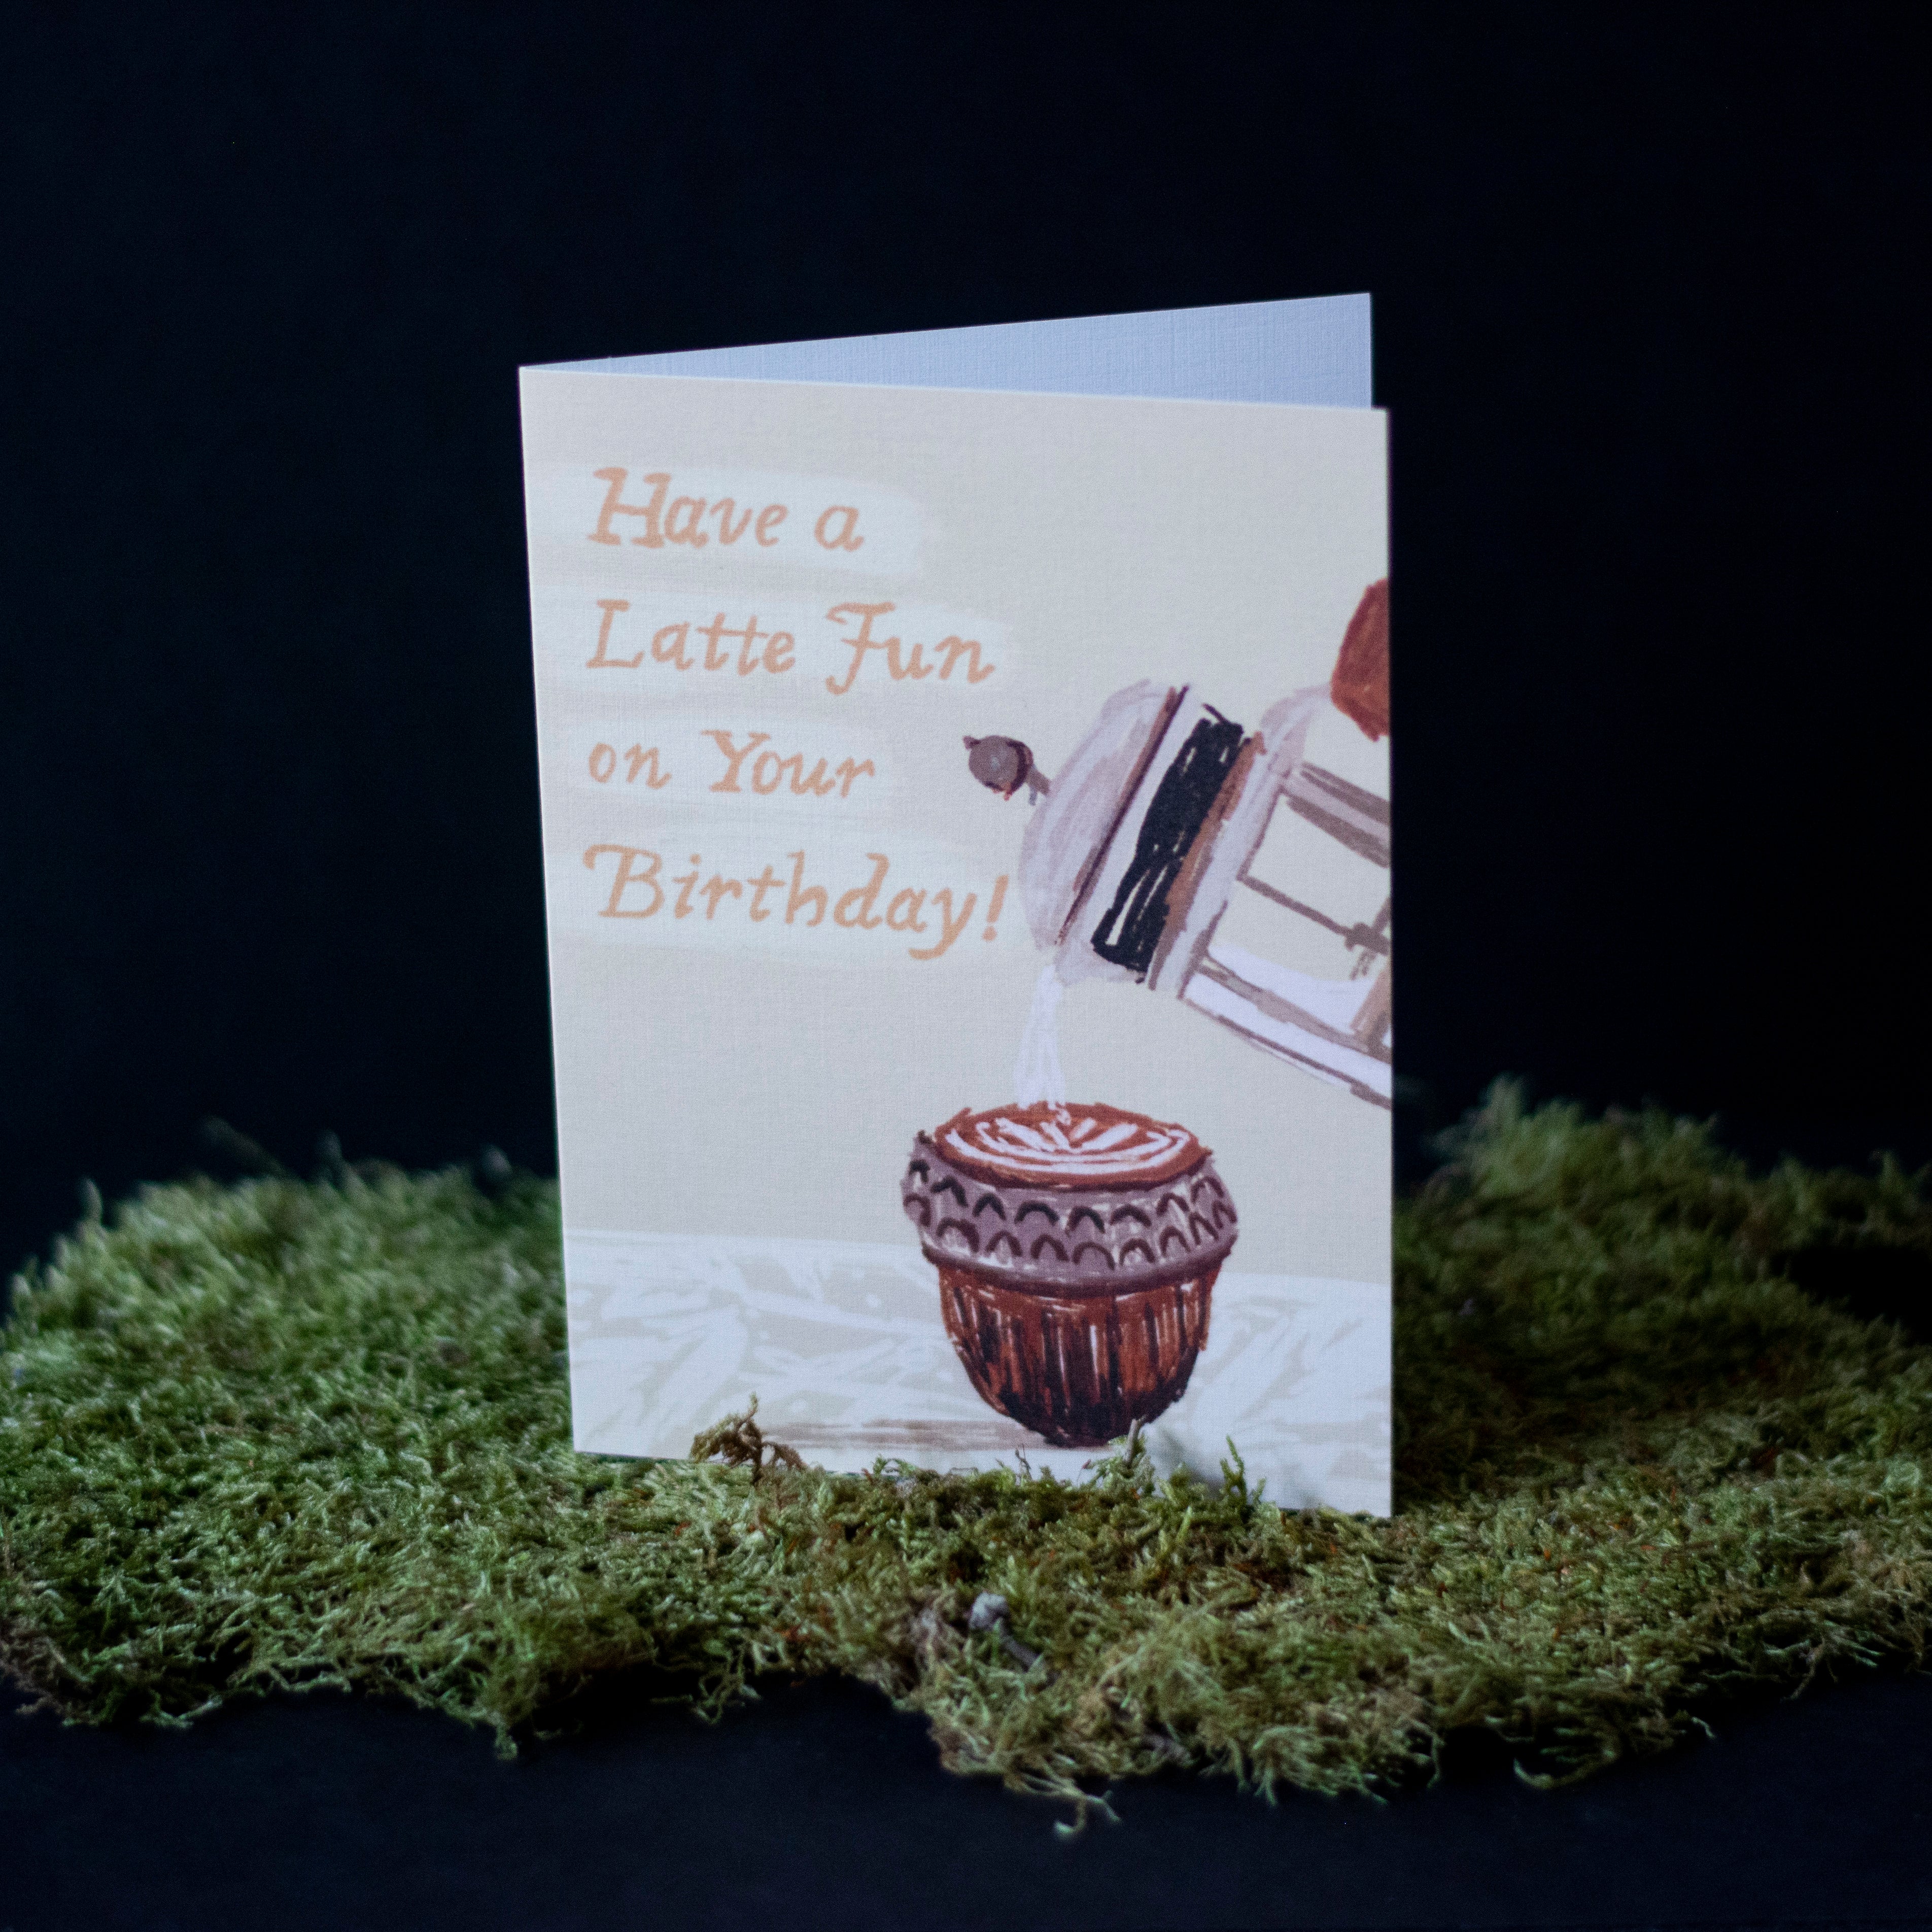 Have a Latte Fun on Your Birthday!